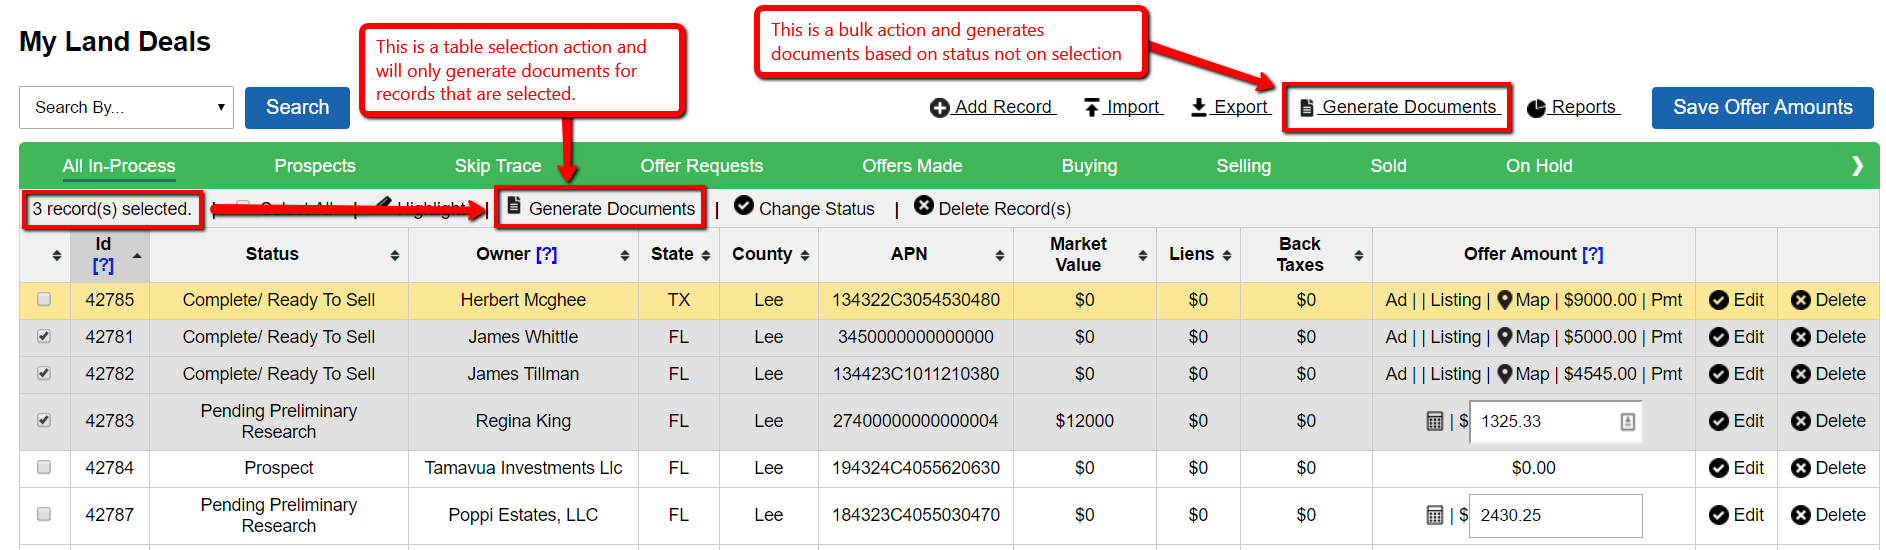 Bulk Actions vs. Select Record Actions